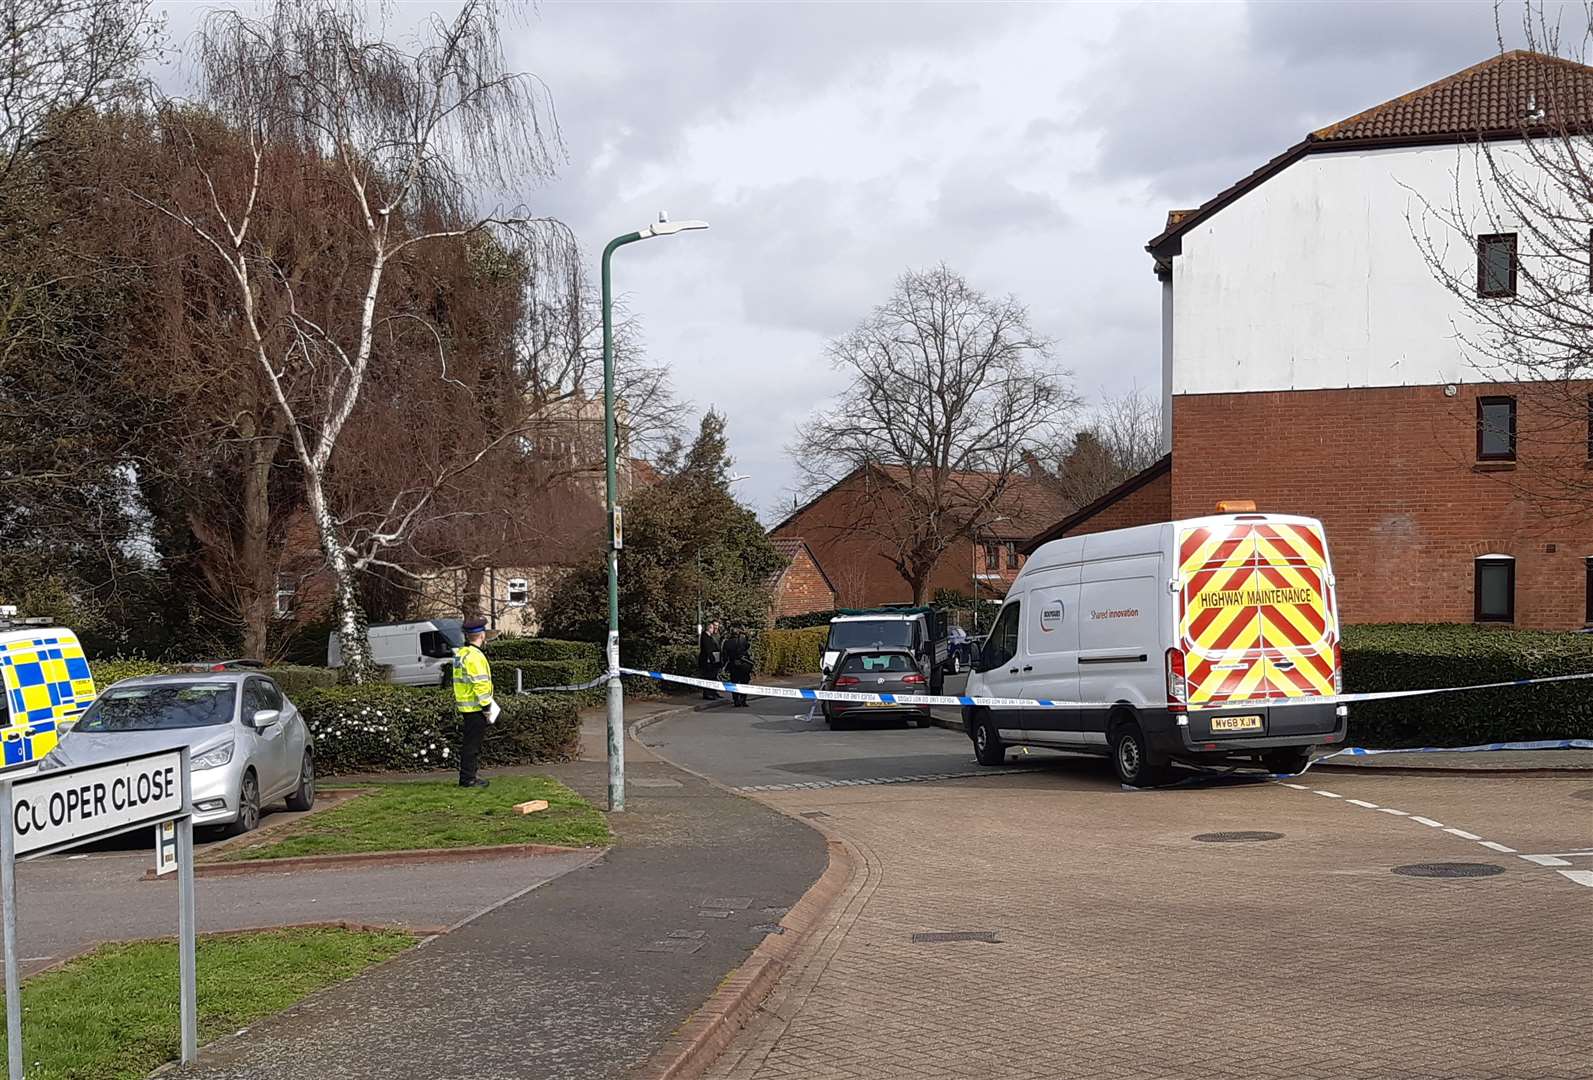 Police cordoned off an area outside Cooper Close, Greenhithe after the incident